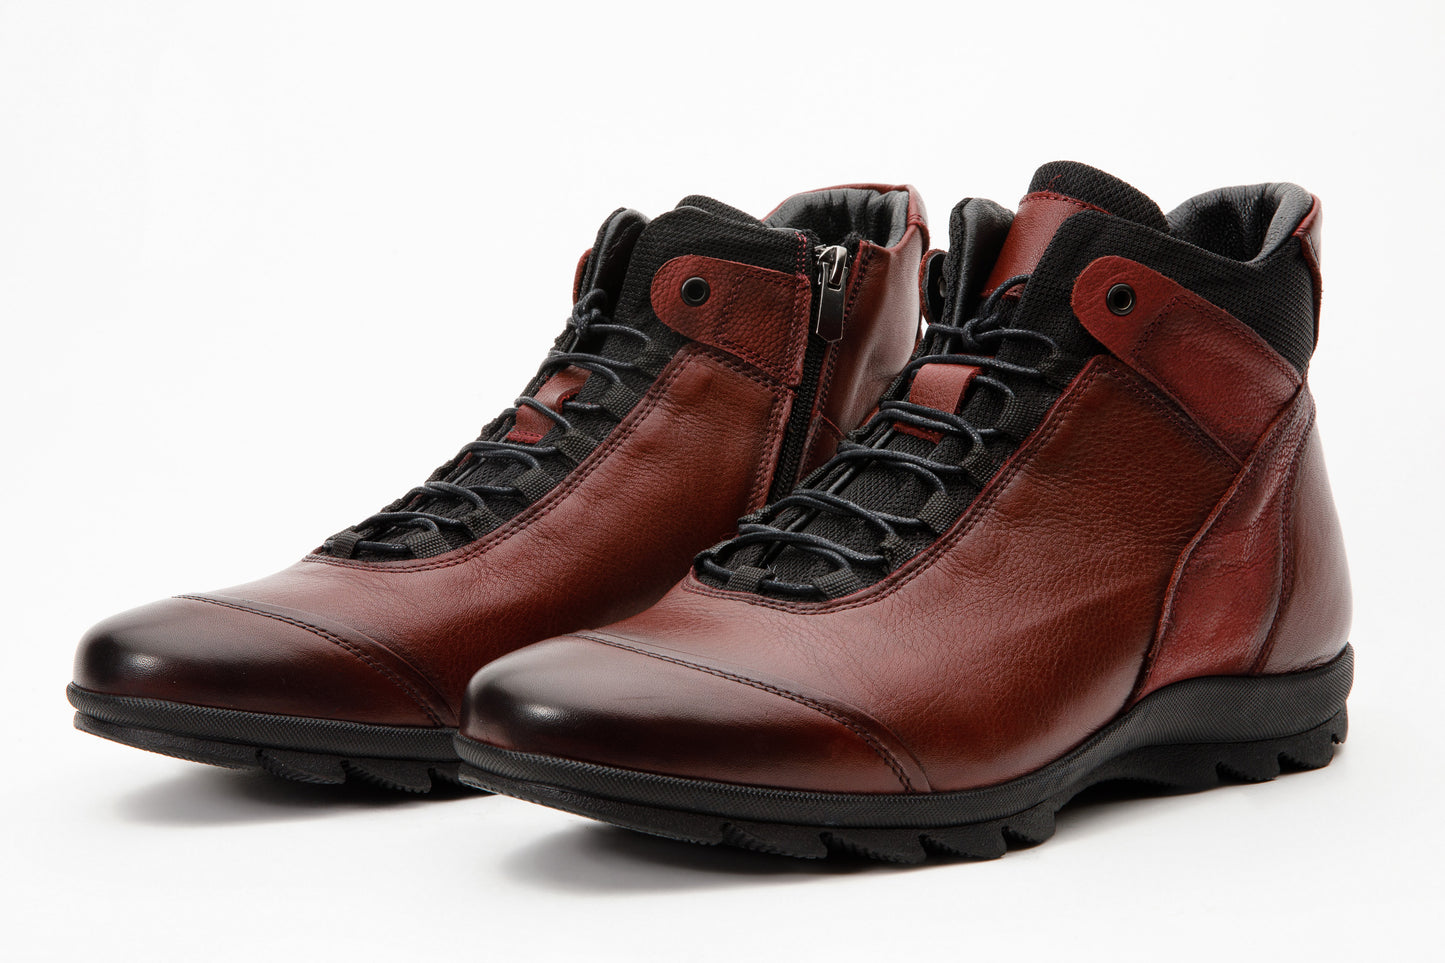 The Houston Leather Burgundy Lace-Up Casual Men Boot with a Zipper